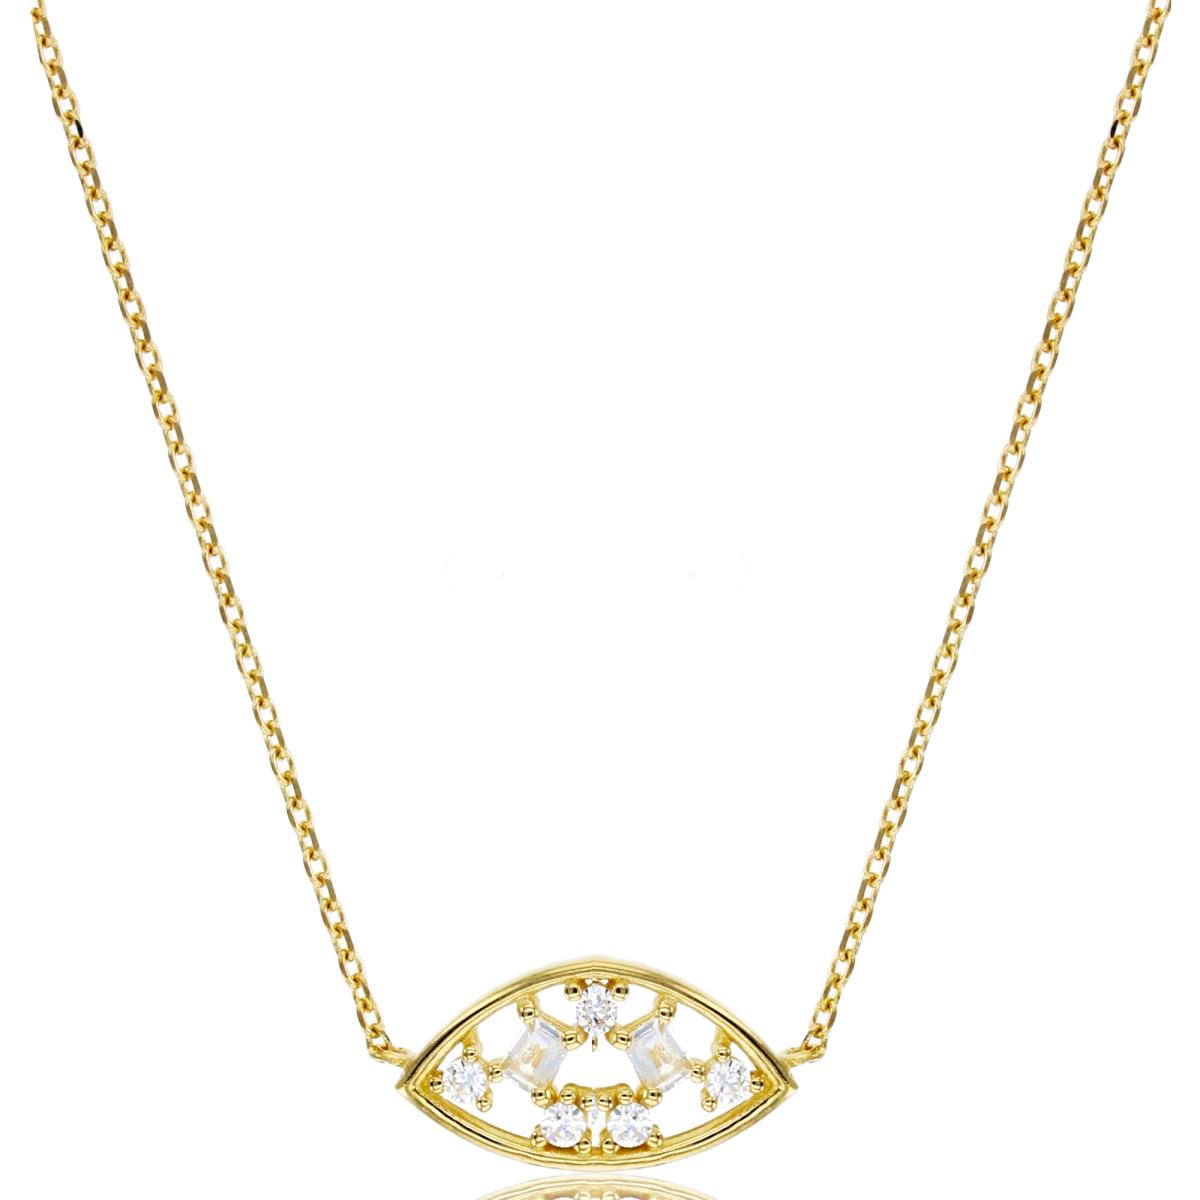 14K Yellow Gold Rnd & SB CZ Scattered MQ-shape 16"+2"Necklace